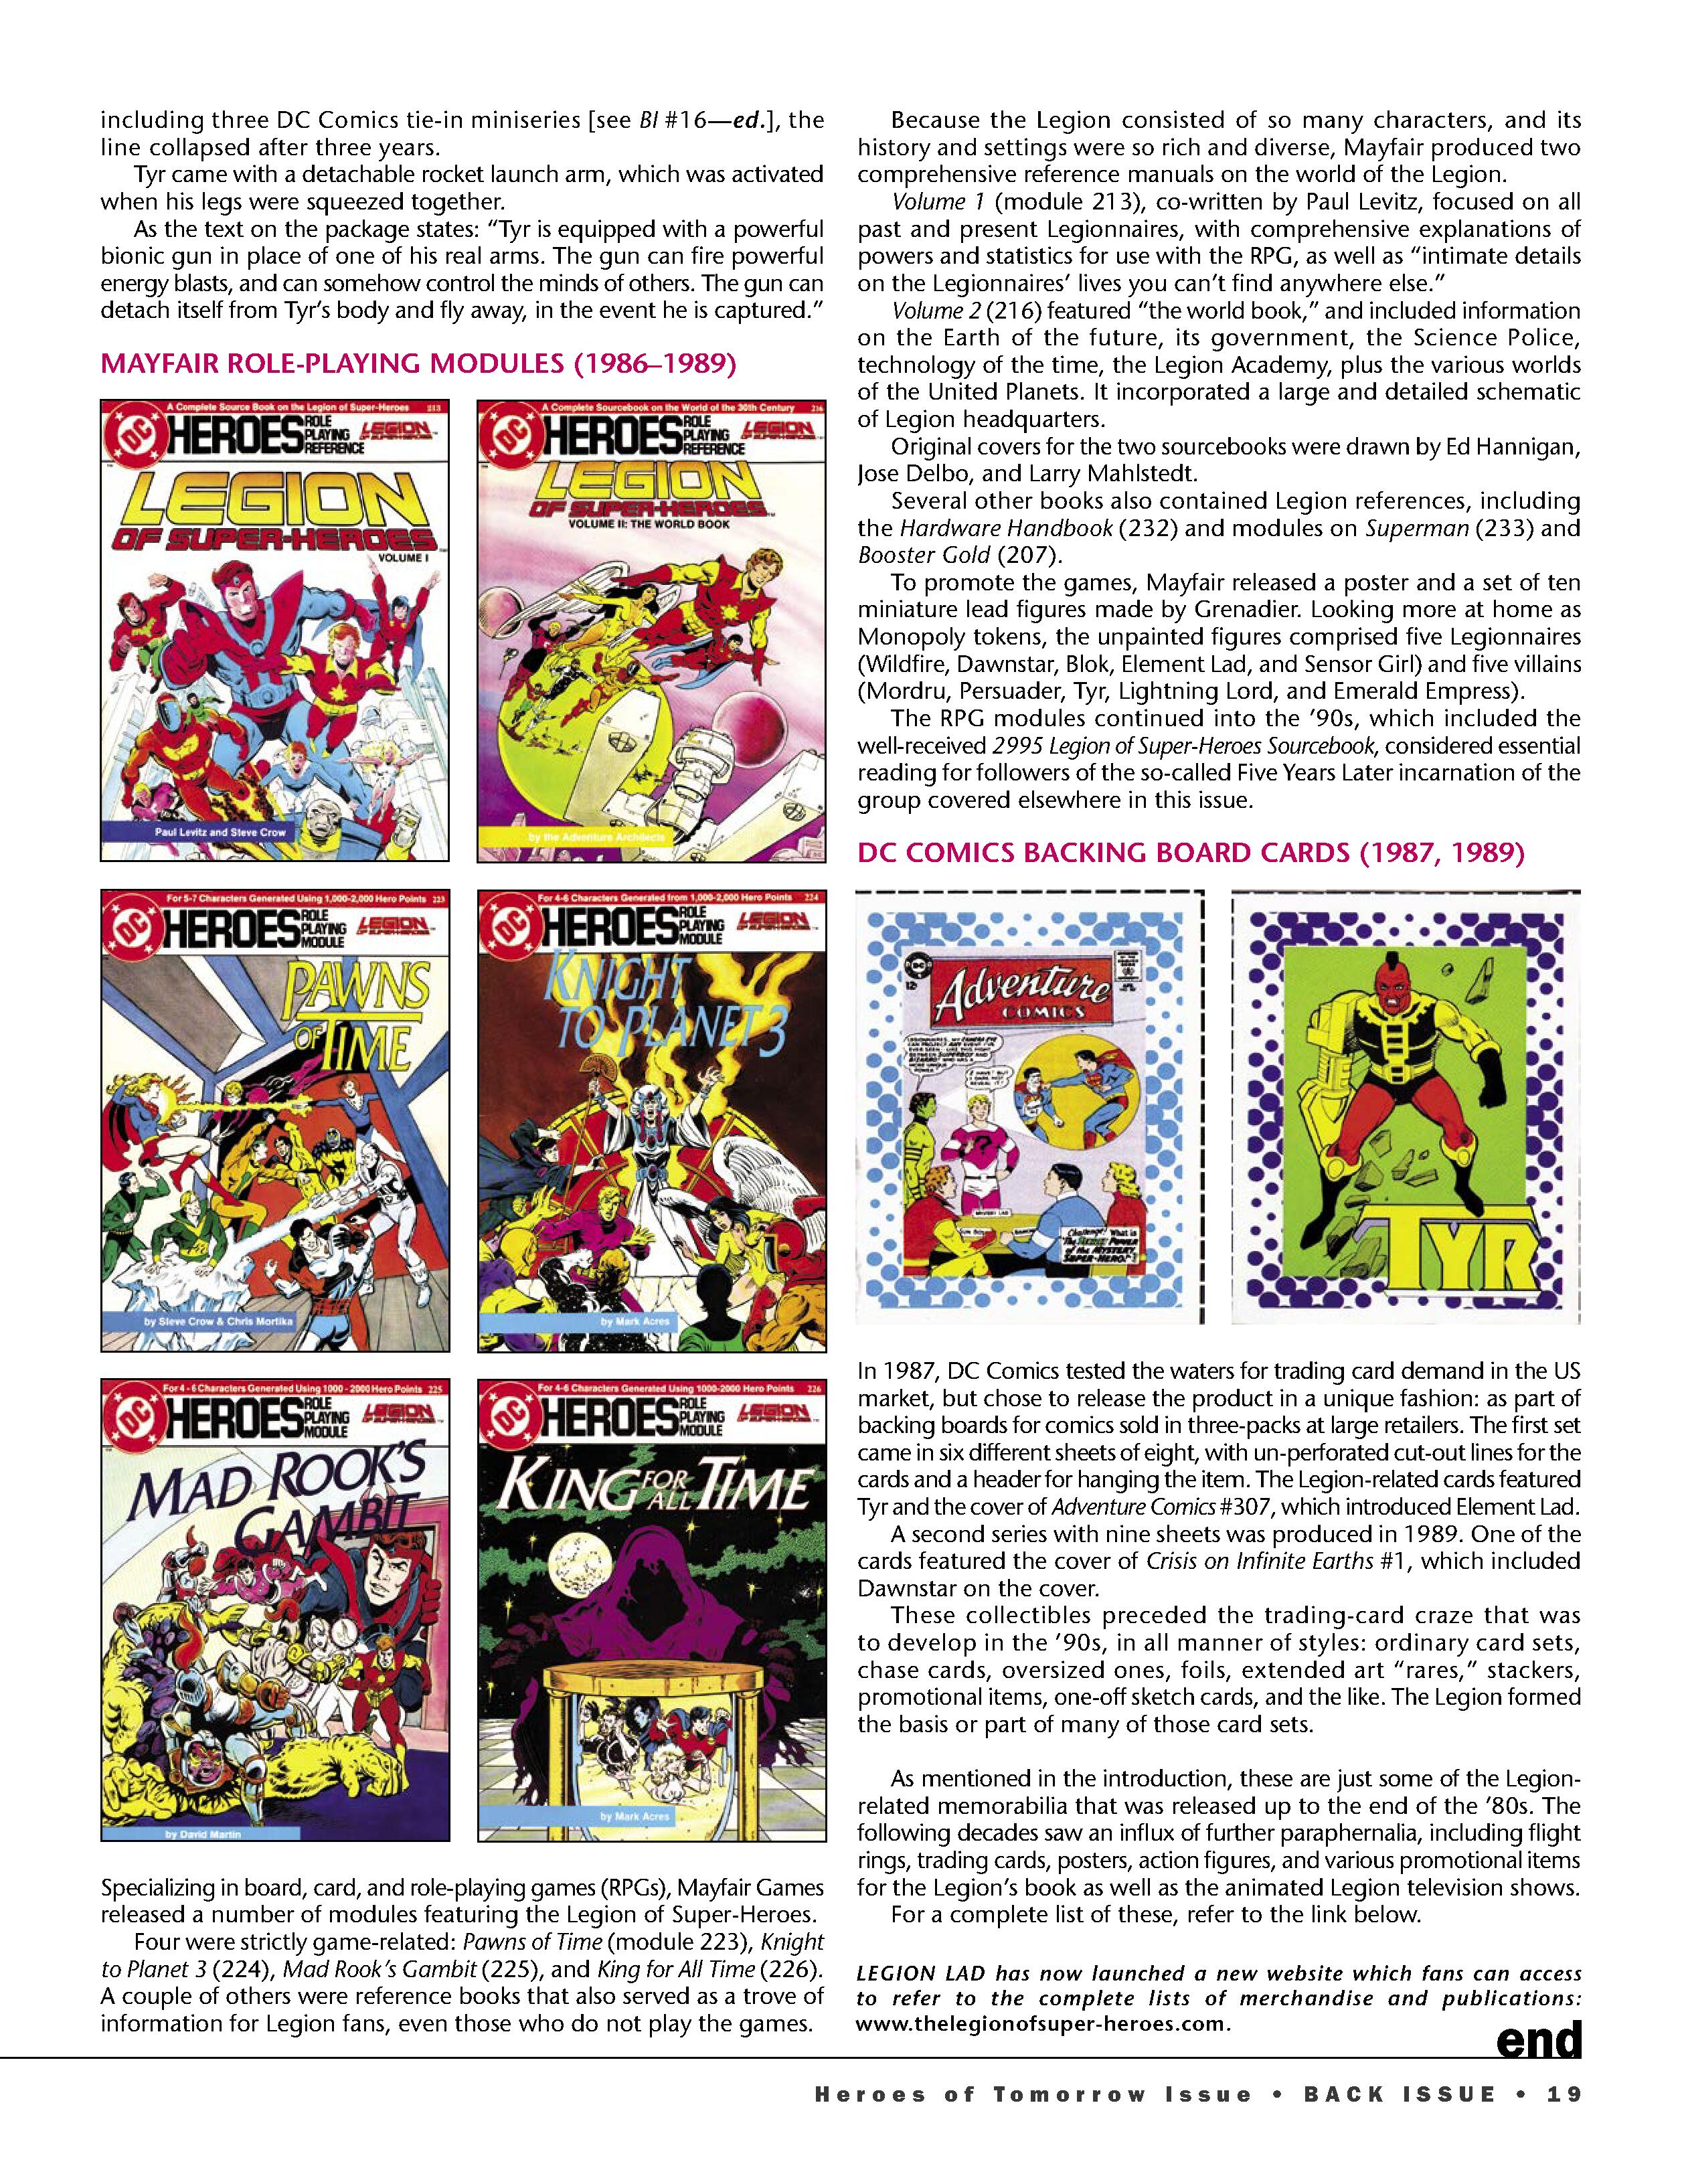 Read online Back Issue comic -  Issue #120 - 21